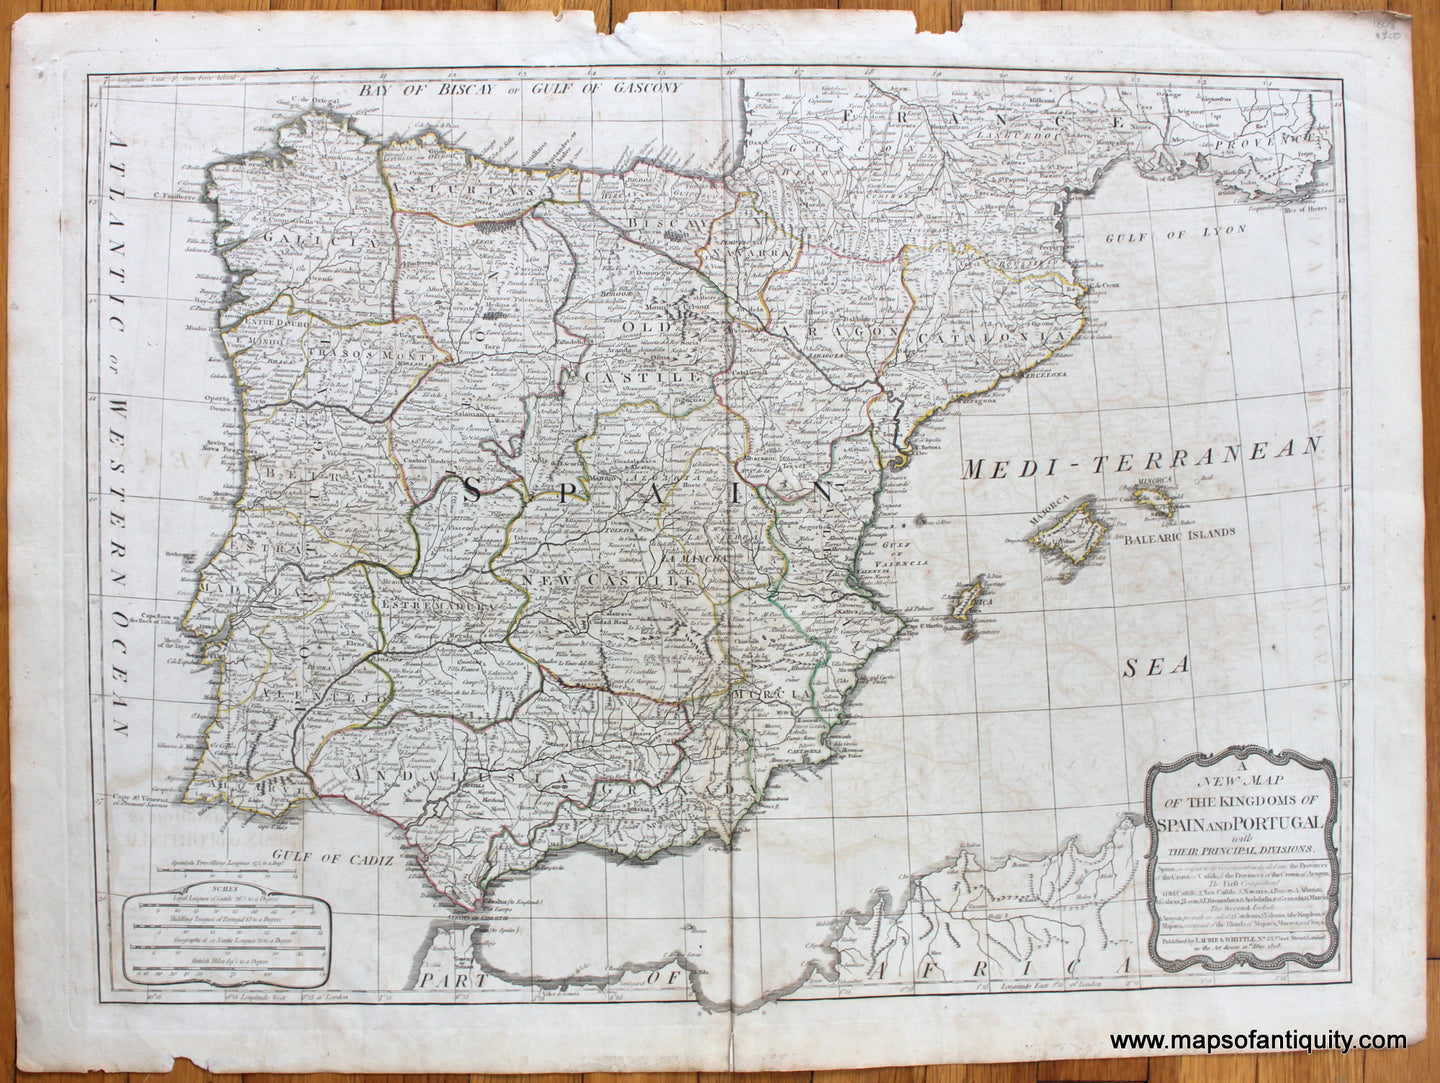 Antique-Hand-Colored-Map-A-New-Map-of-the-Kingdoms-of-Spain-and-Portugal-with-Principal-Divisions-Europe-Spain-&-Portugal-1808-Laurie-&-Whittle-Maps-Of-Antiquity